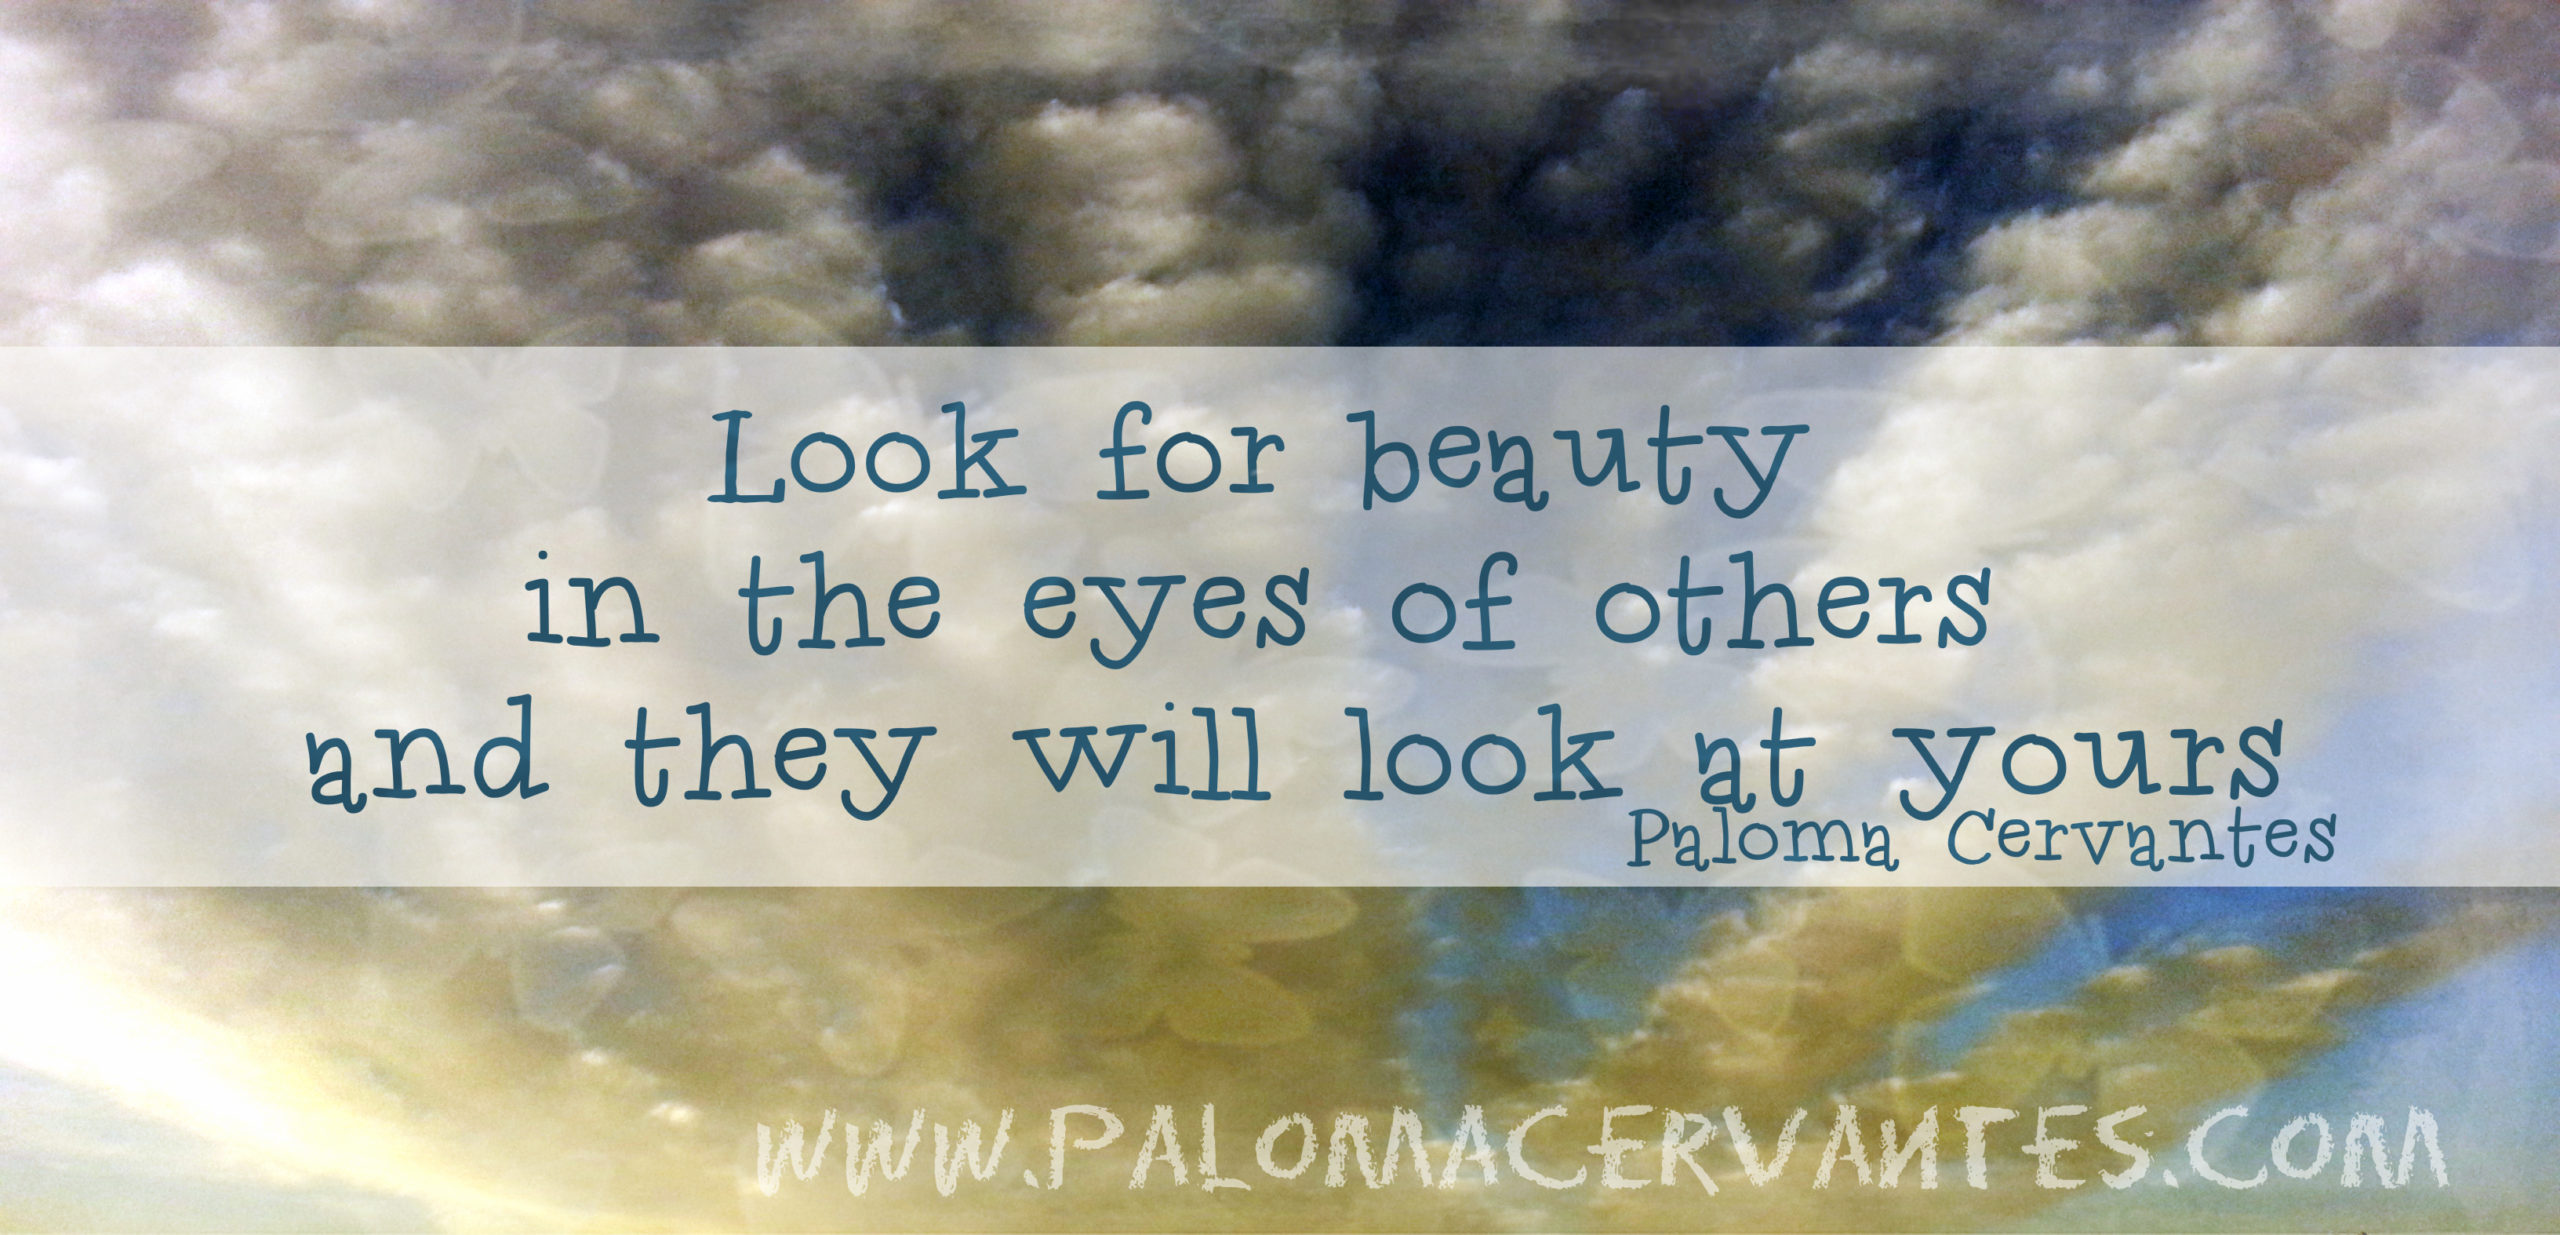 Look for beauty in the eyes of others... S&C Center